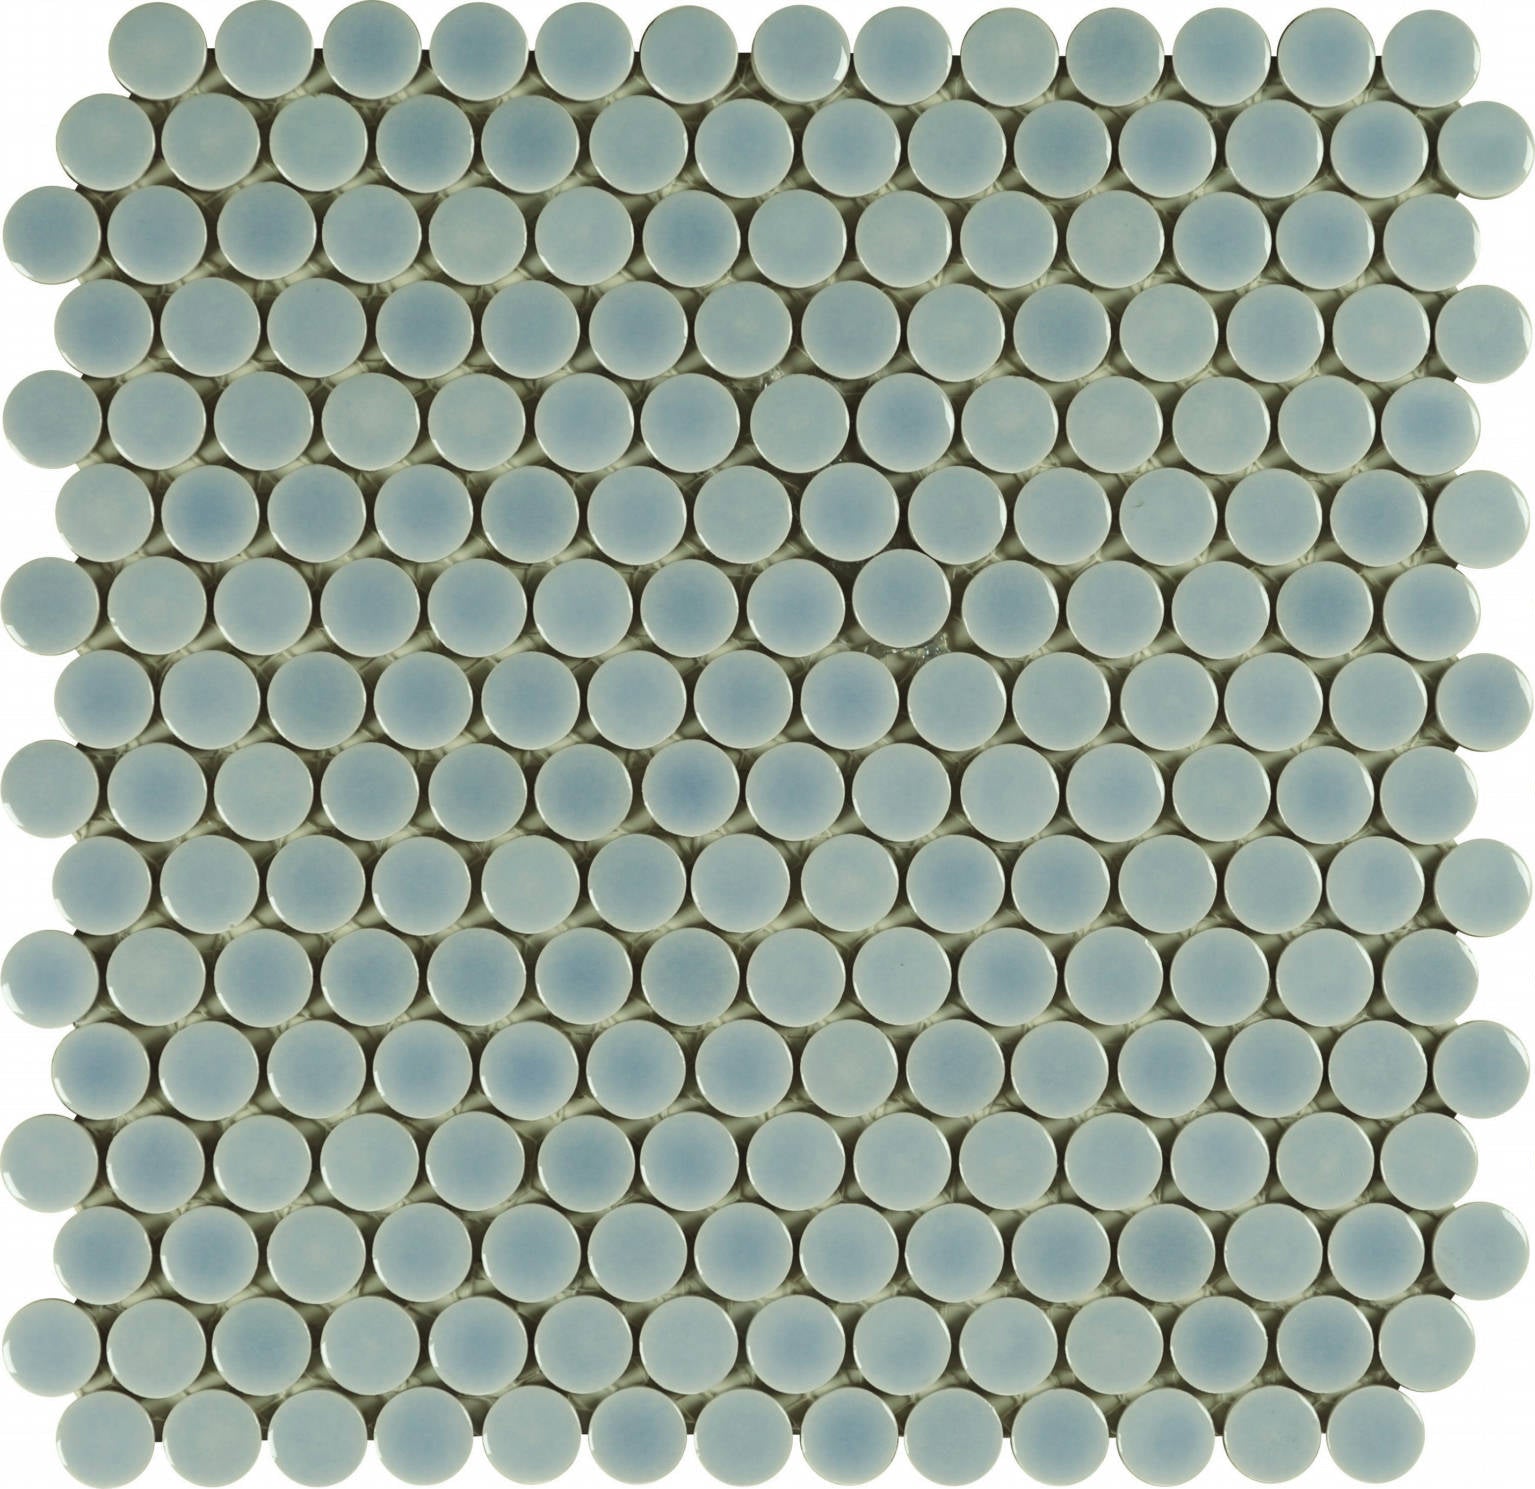 Mosaic Light Blue 1-Inch Penny Rounds Pattern (12"x12")